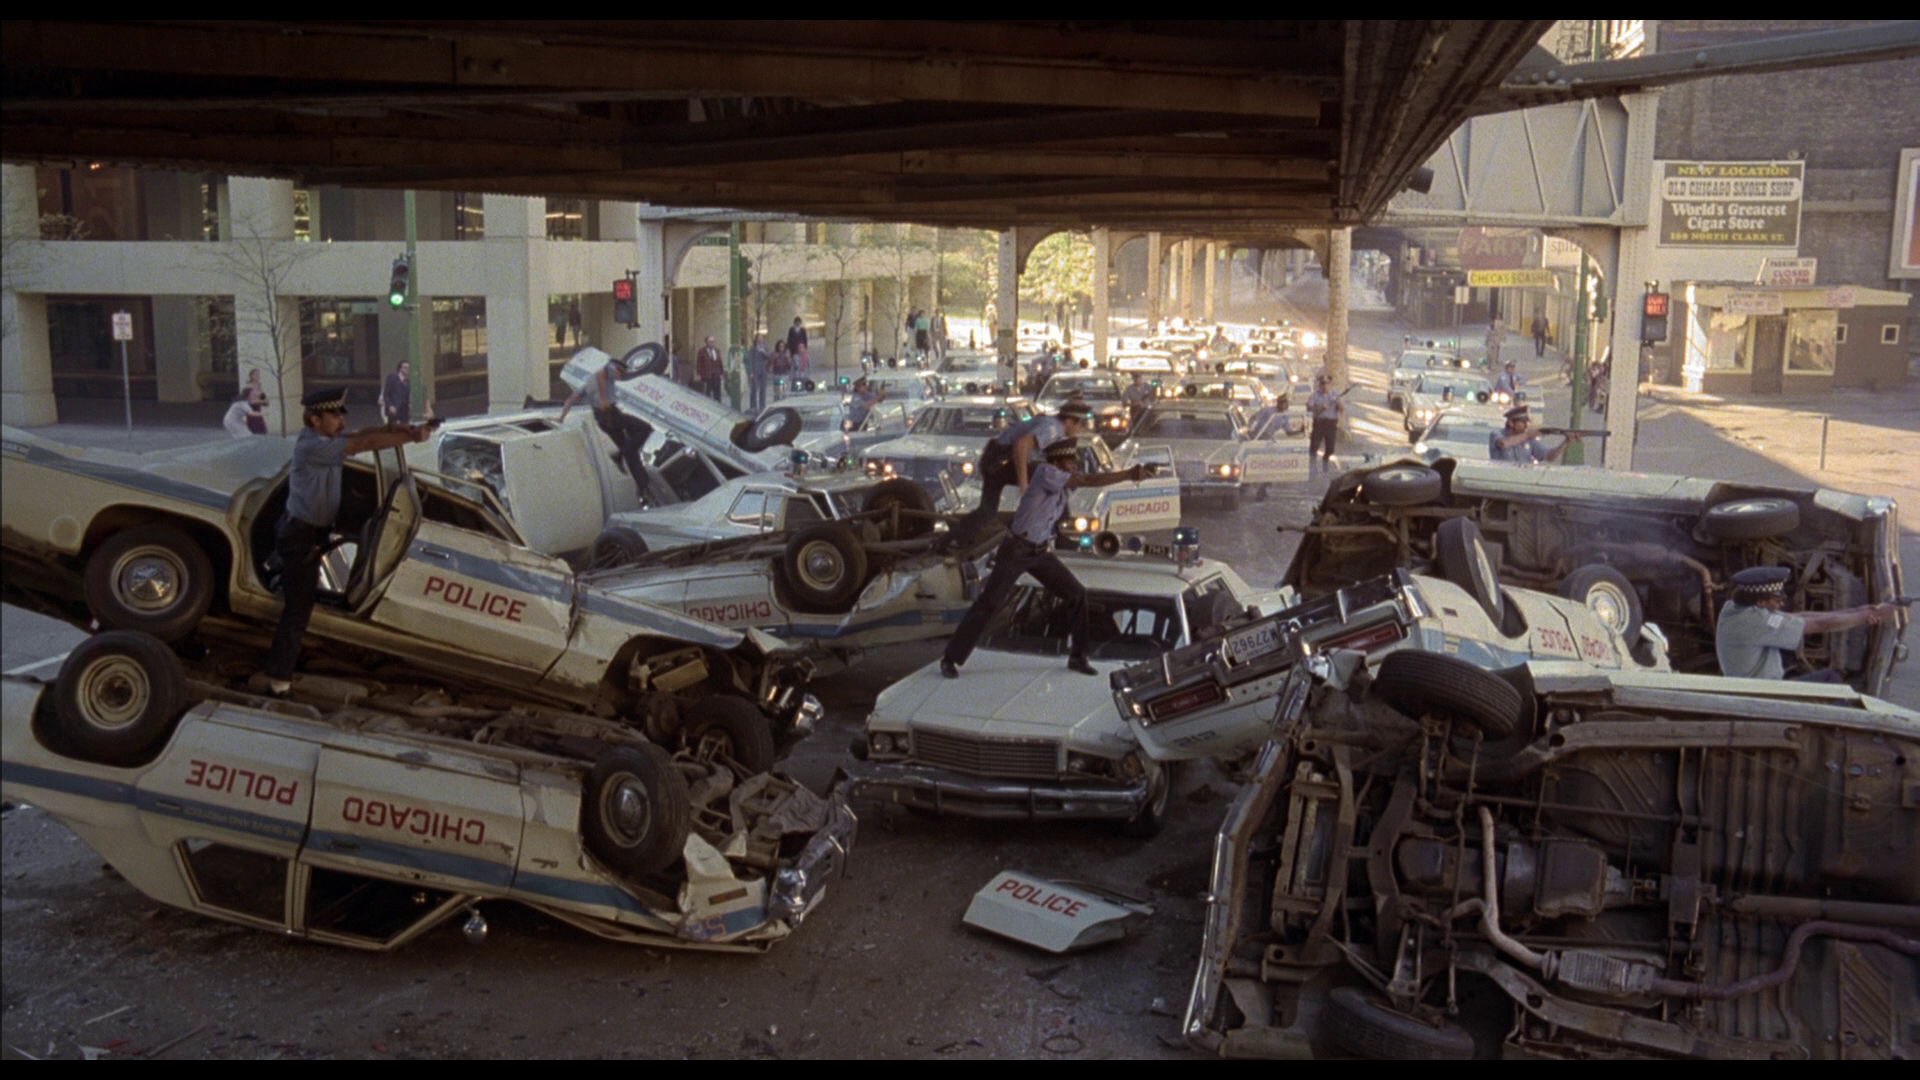 http://goodfilmguide.co.uk/wp-content/uploads/2012/06/Blues-Brothers-car-chase.png